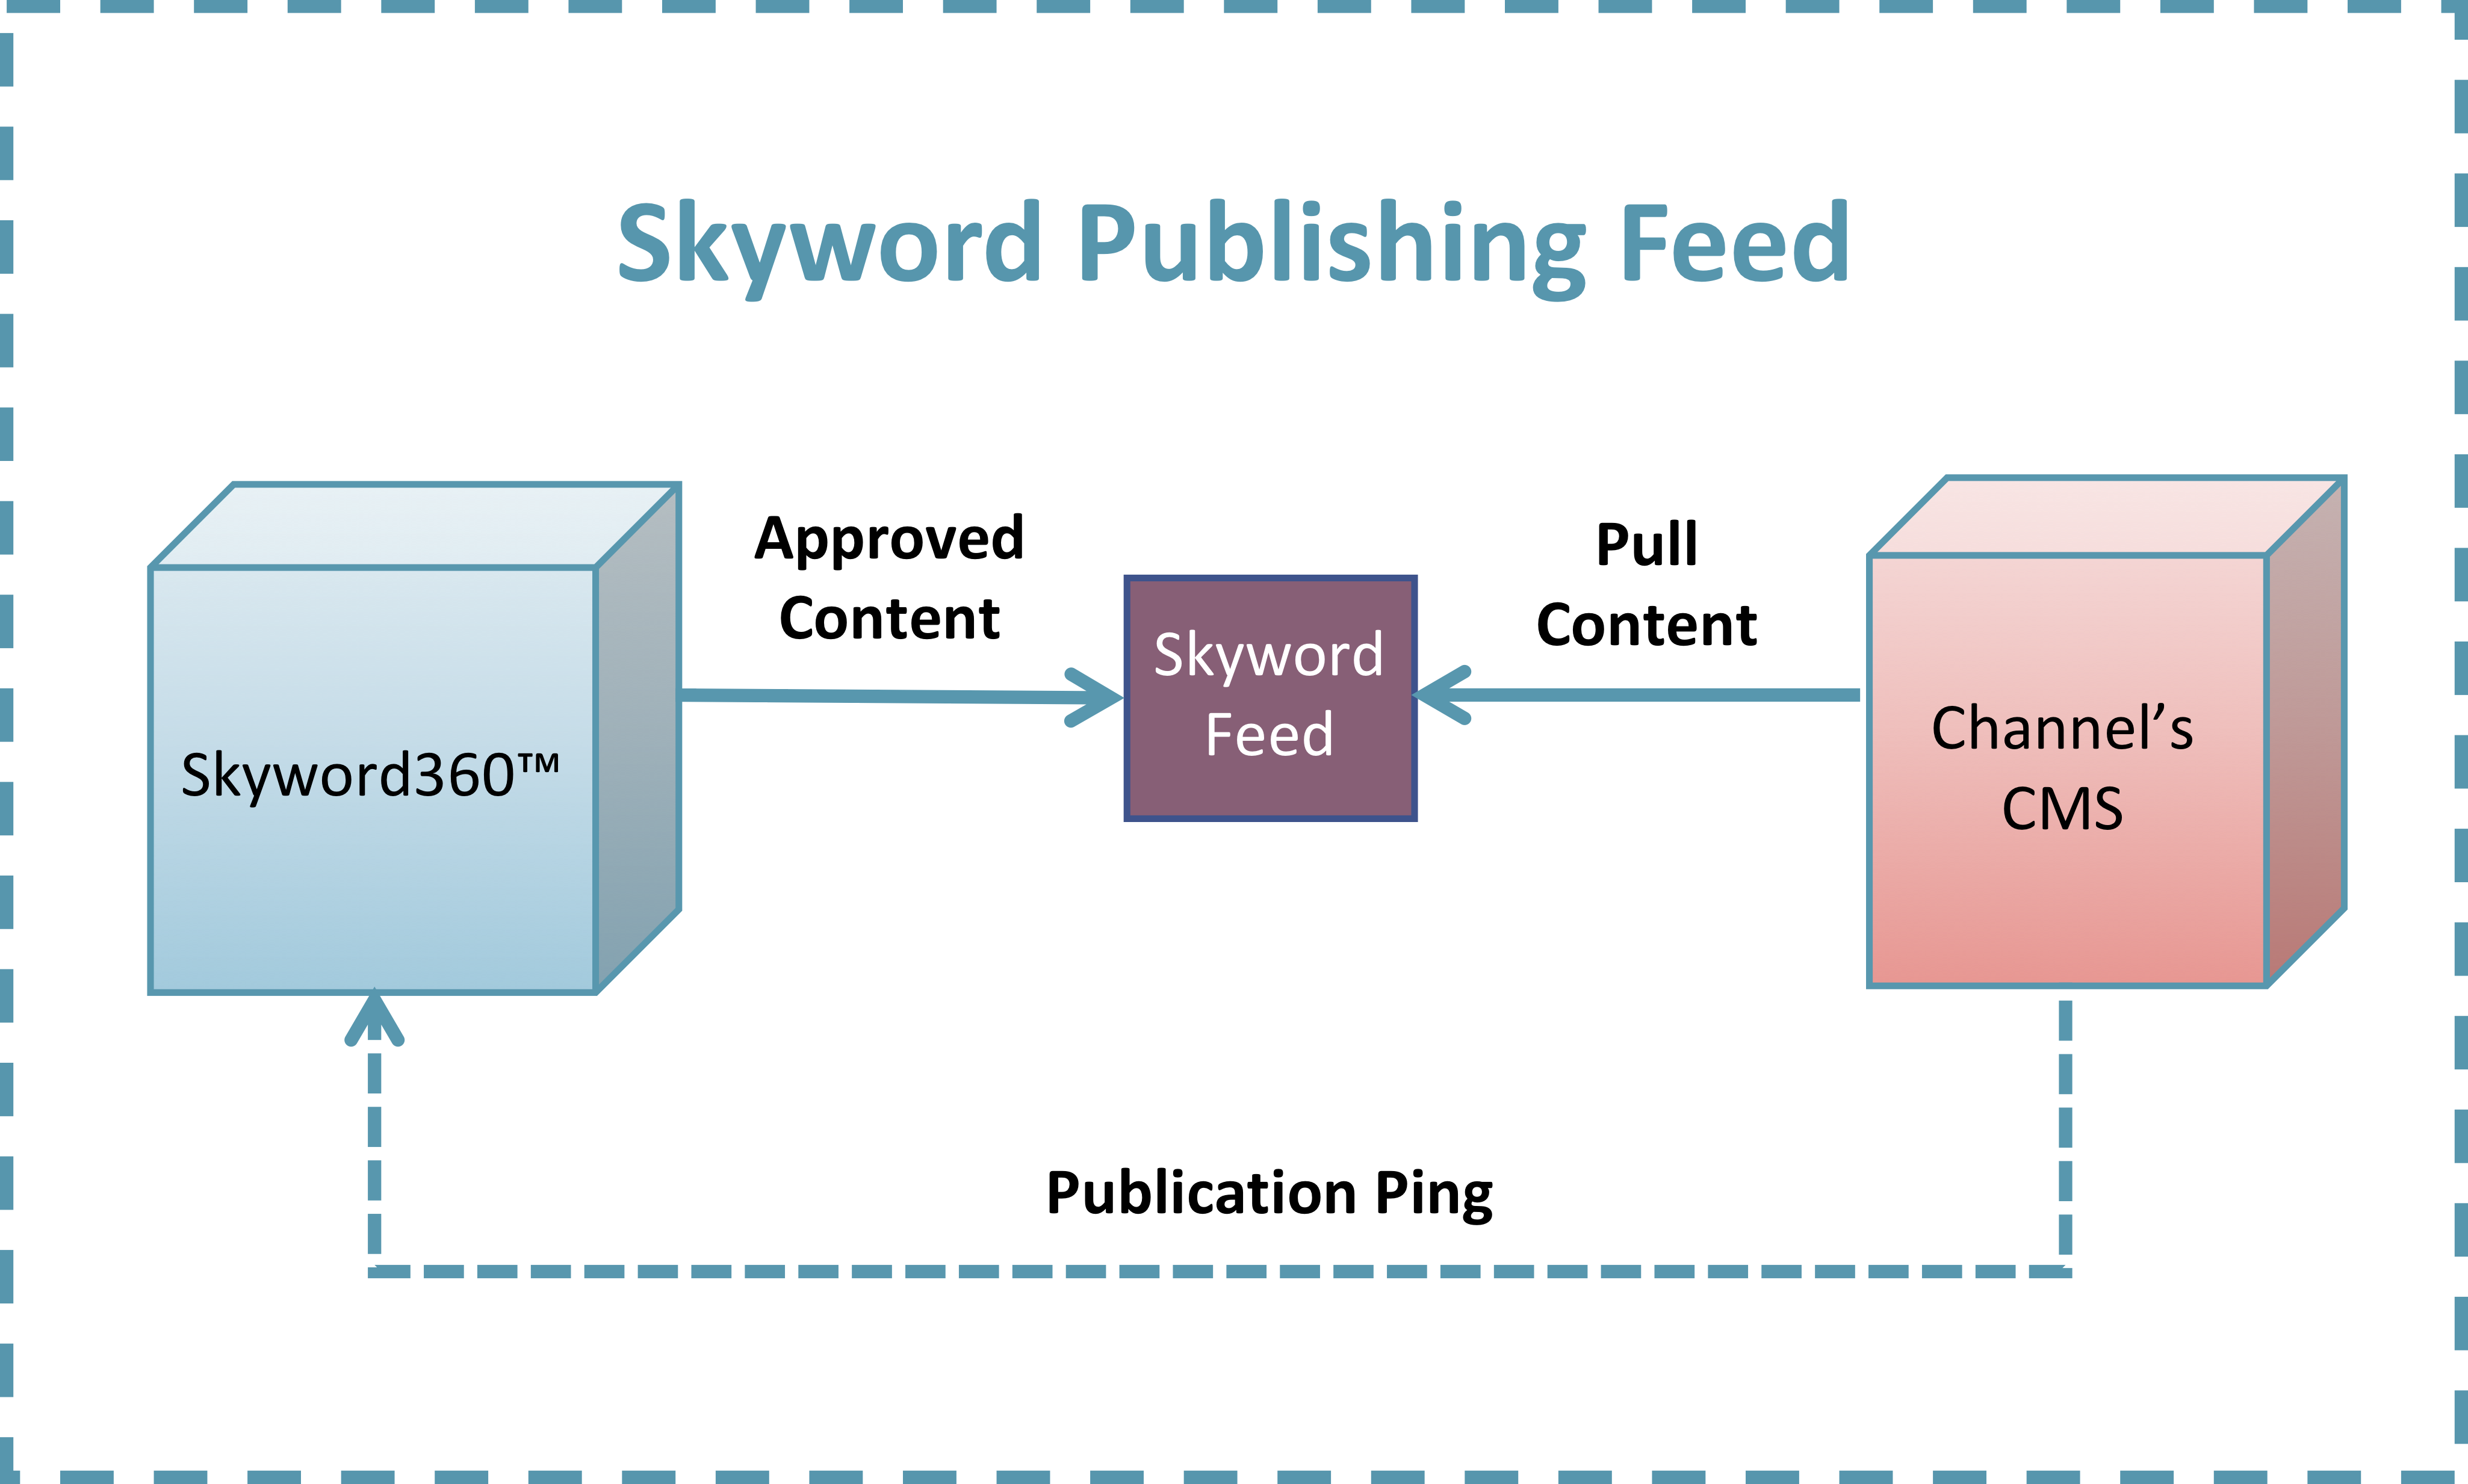 You can use the Publishing Feed to publish approved content to your channel's CMS.